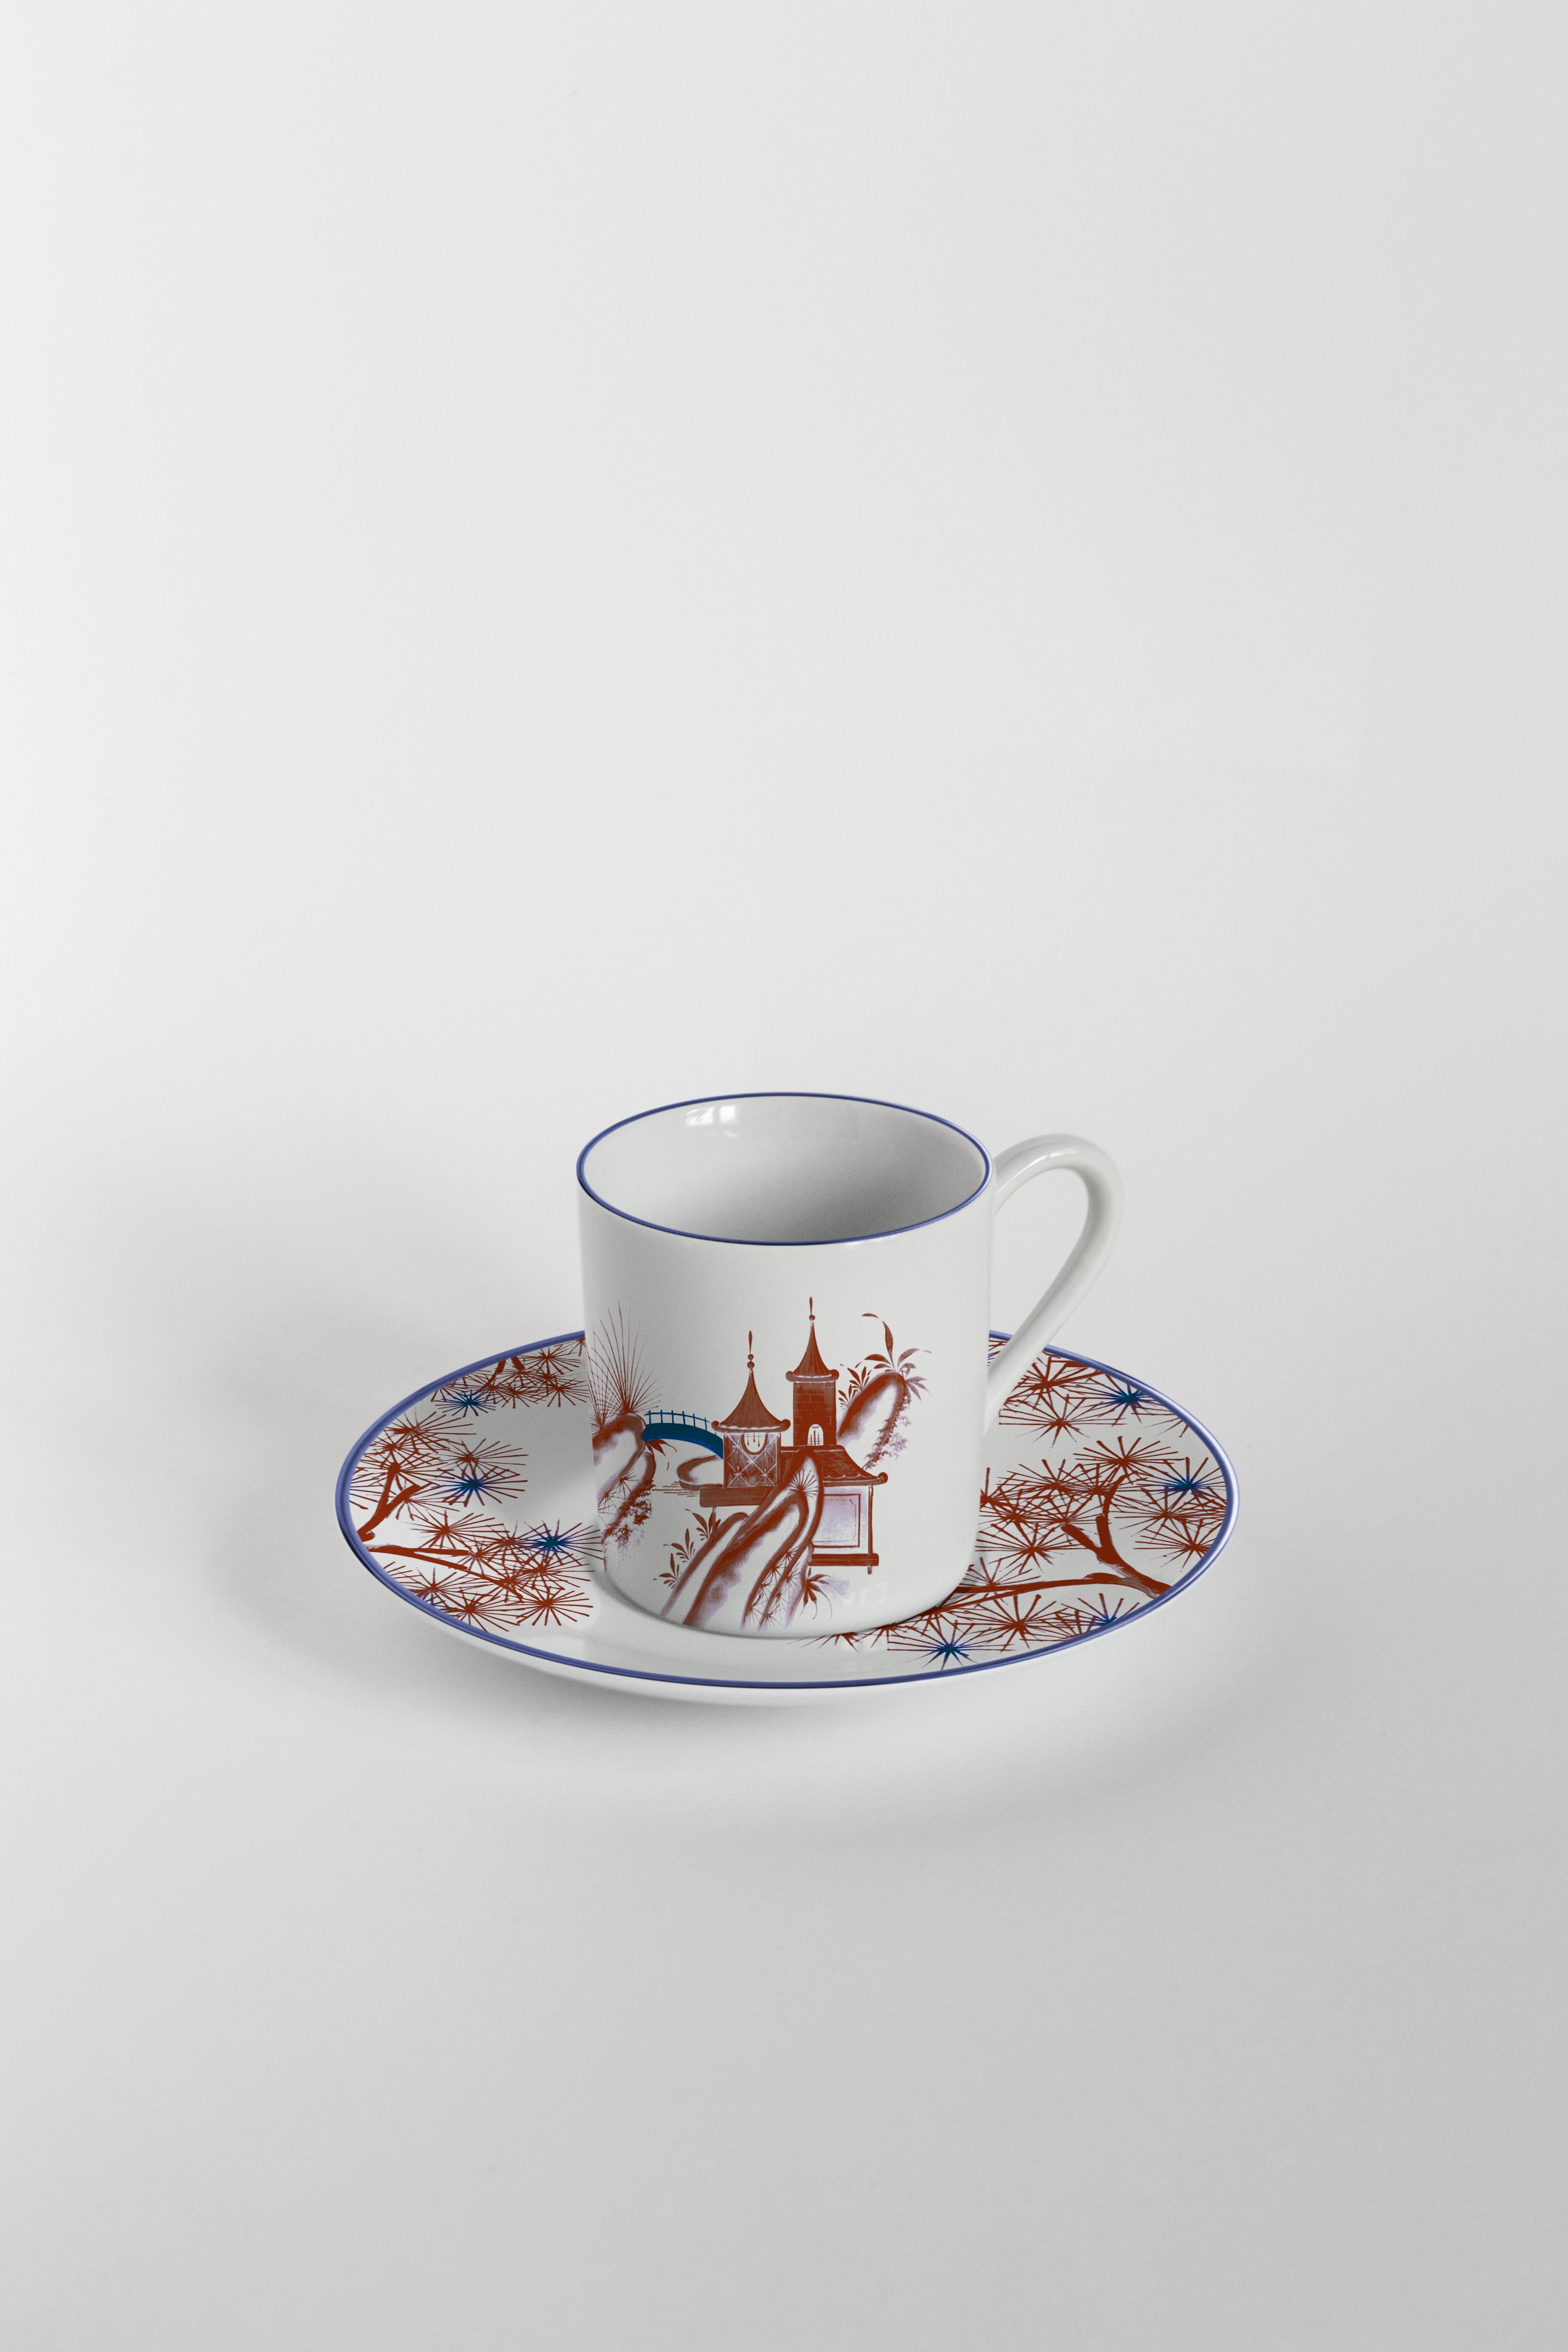 Bordeaux and blue are the primary colors of this Japan inspired collection of plates, where ancient Japanese scenes take place on the rivers of a fairy lake.
Coffee set with 6 coffee cups and plates.